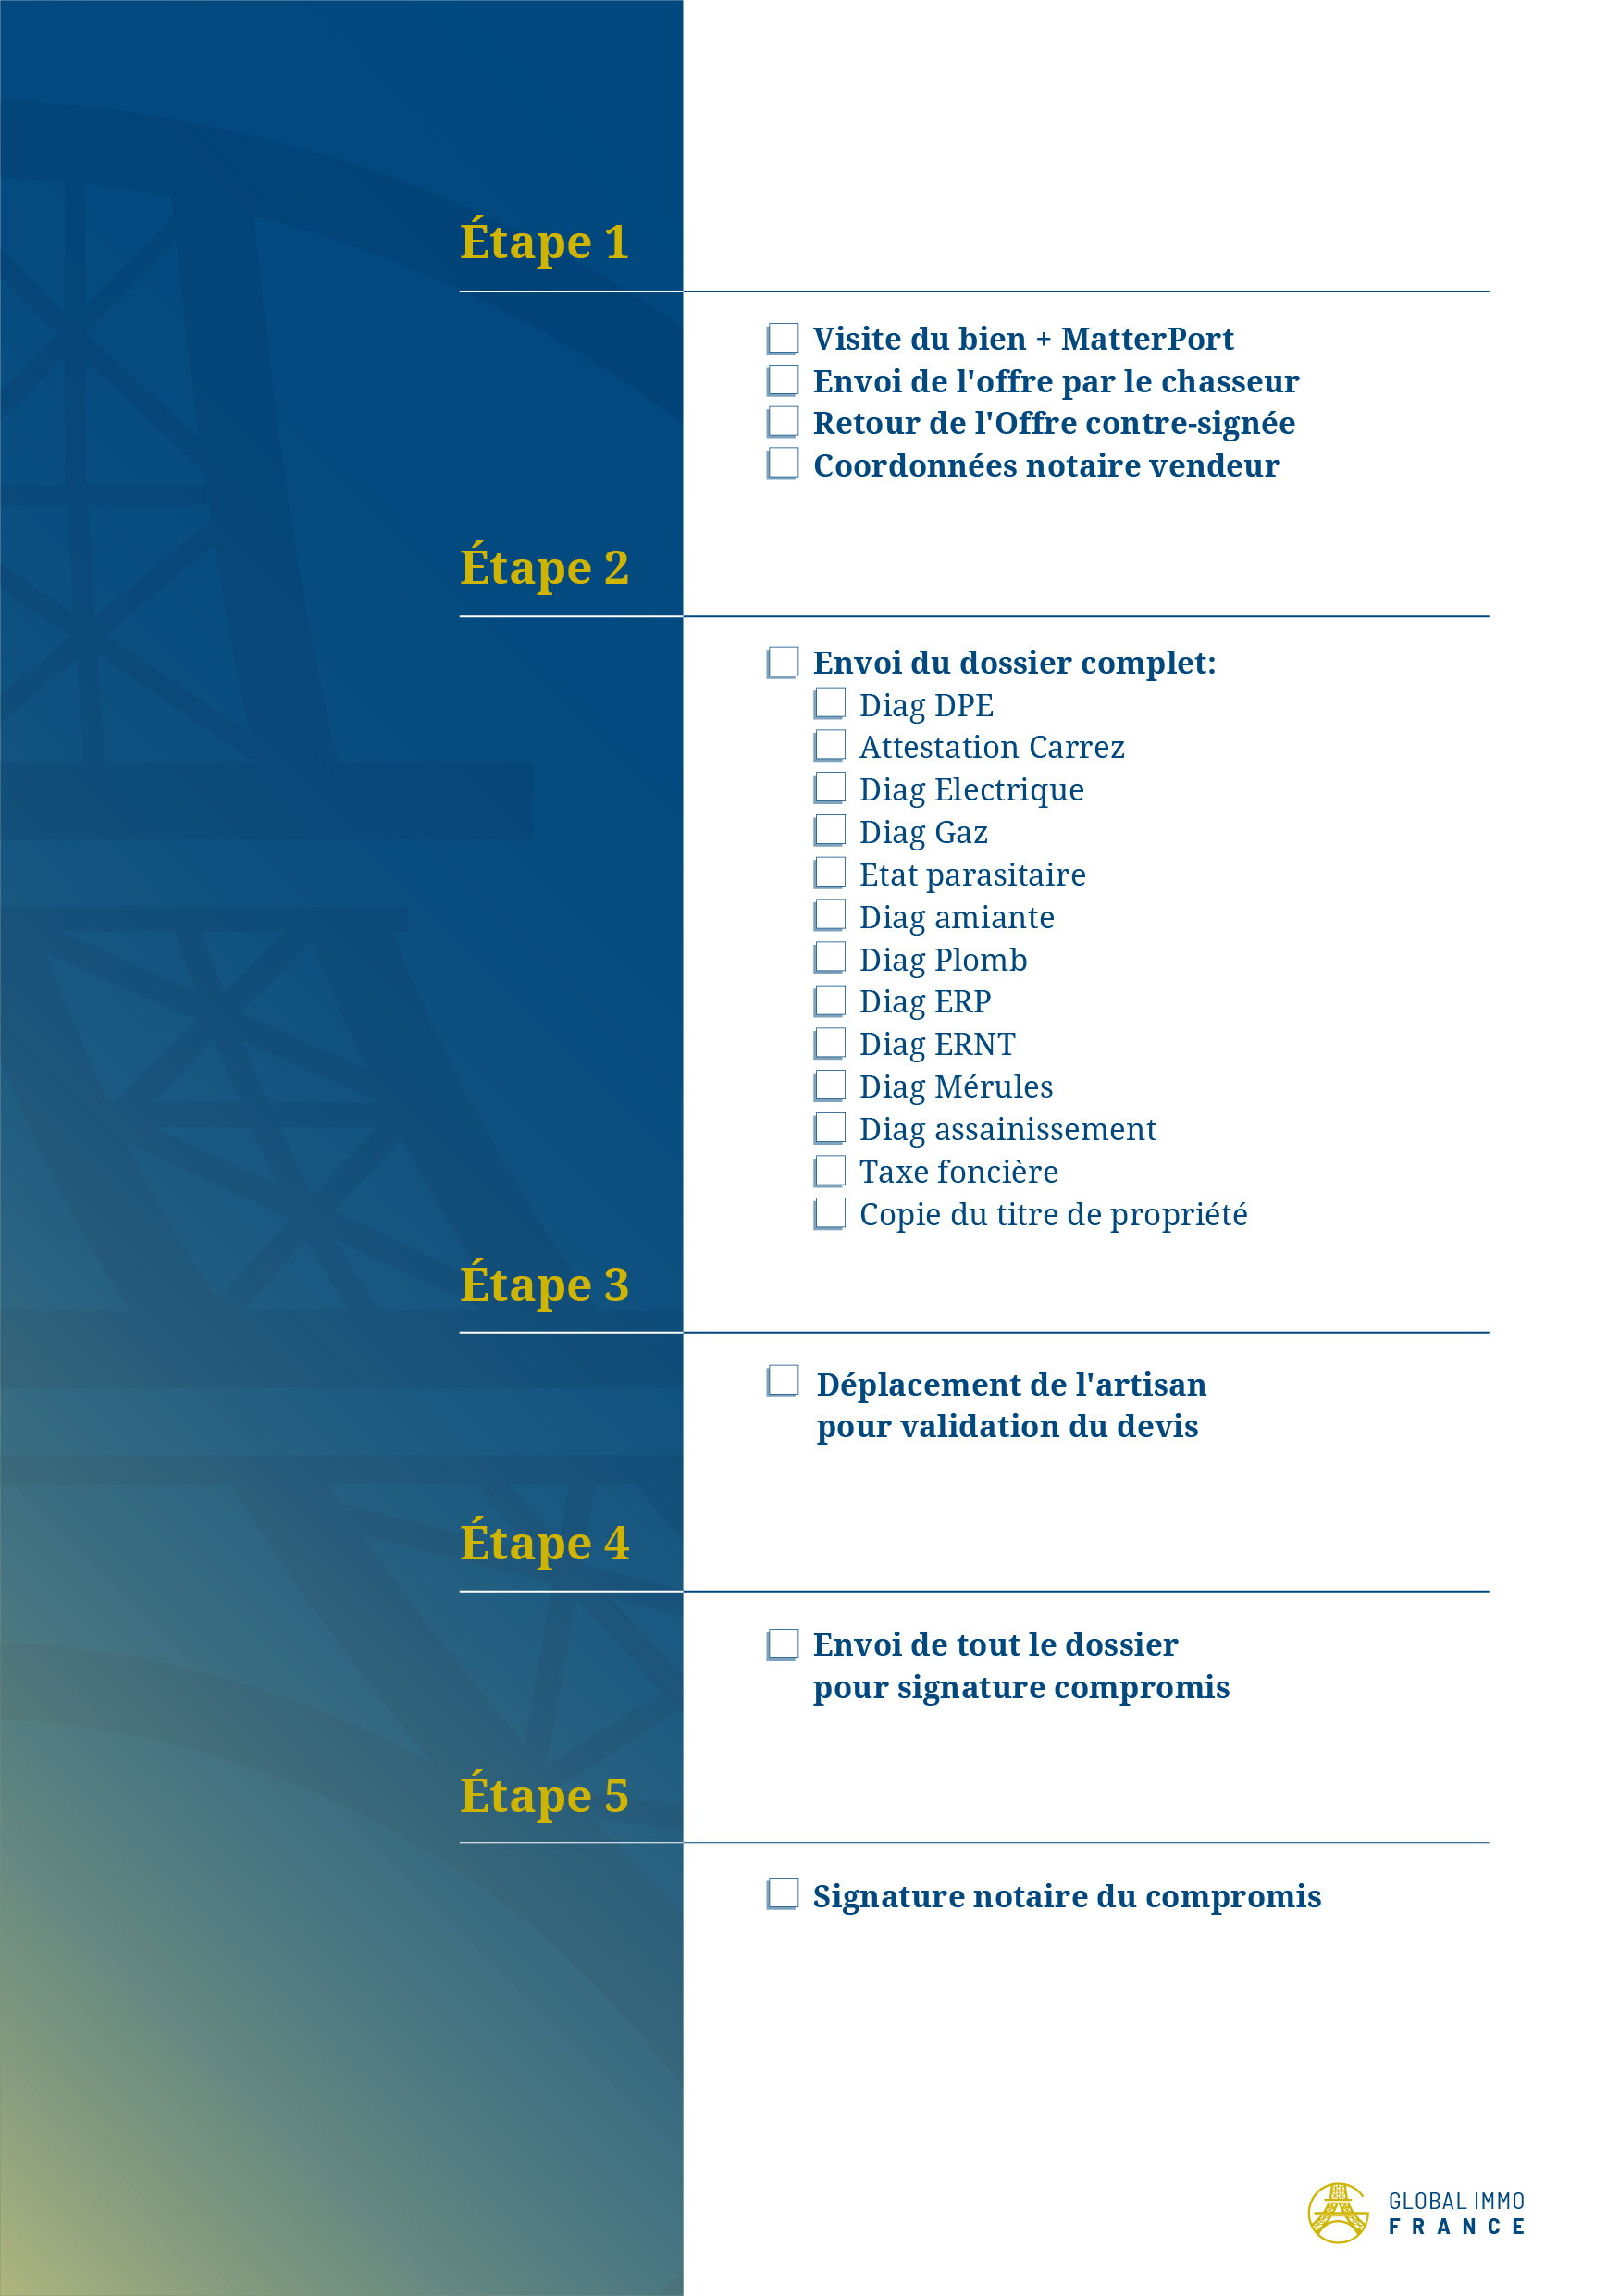 Document layout for Global Immo France